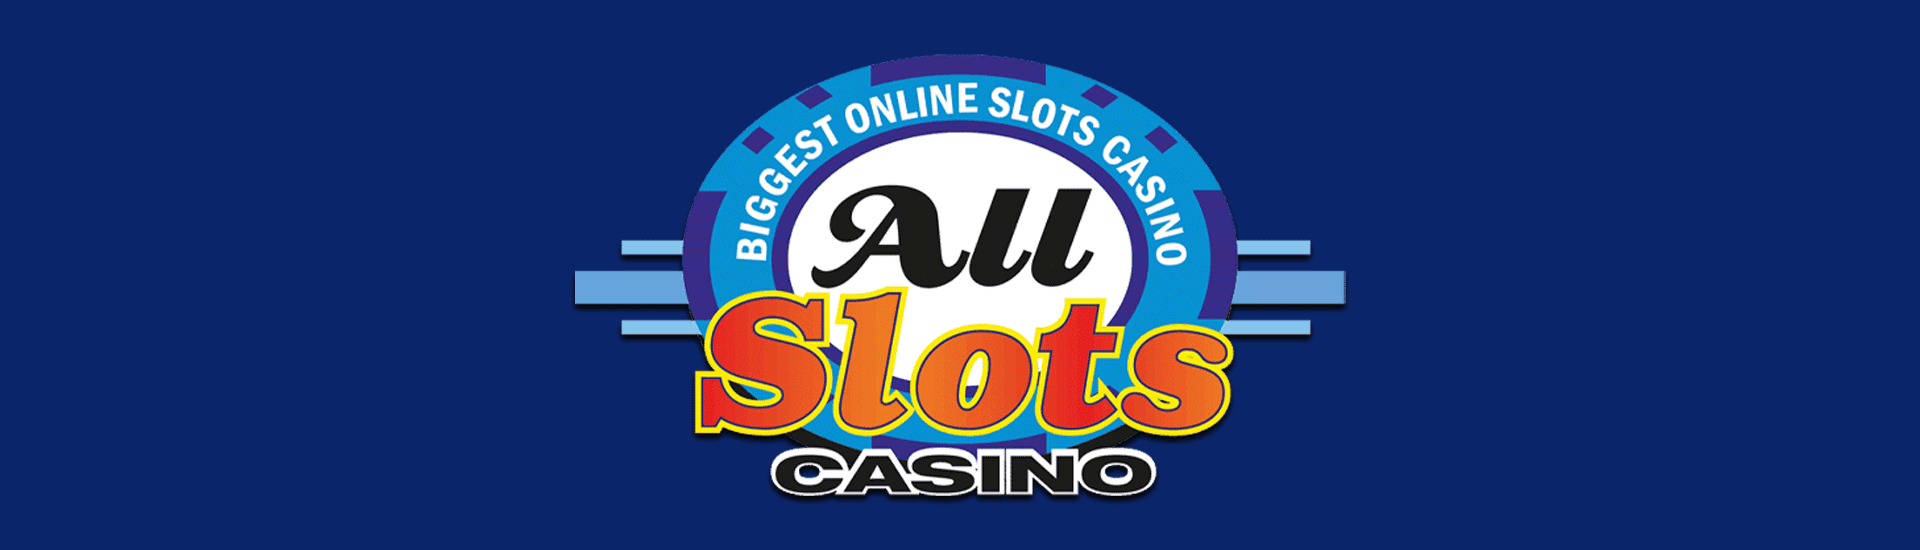 All Slots Casino | Offer & Review - Hideous Slots